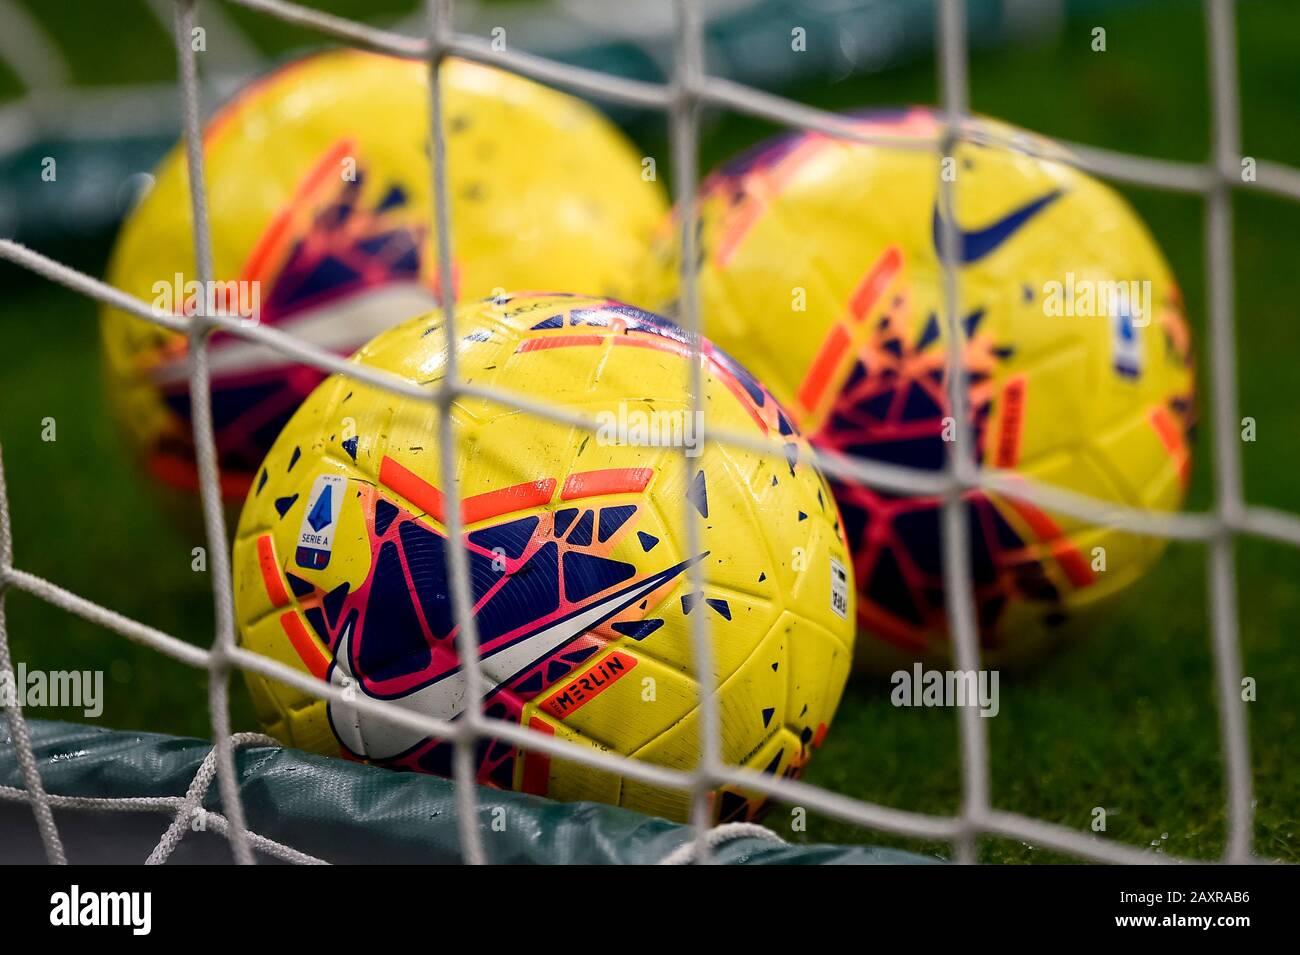 Milan, Italy - 12 February, 2020: Official Nike Merlin match balls are seen  prior to the Coppa Italia semi final football match between FC  Internazionale and SSC Napoli. SSC Napoli won 1-0